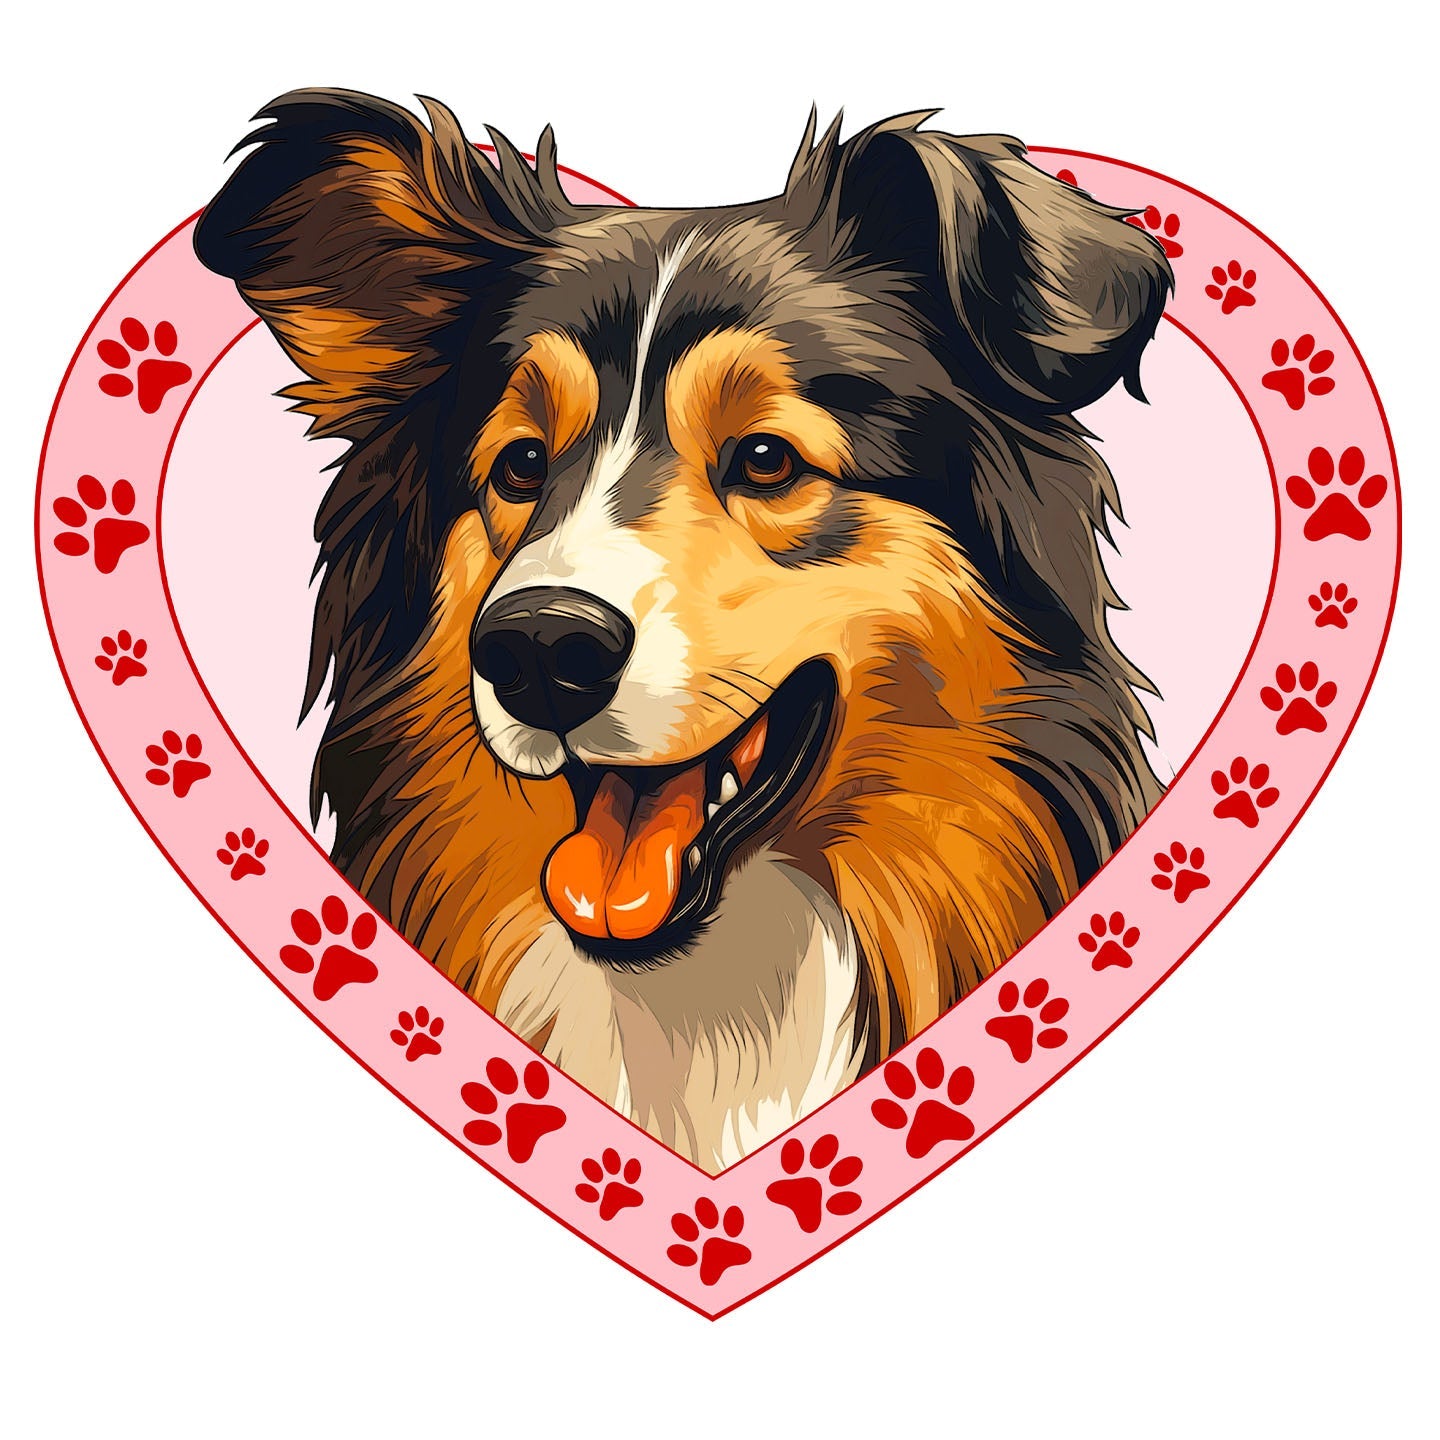 Collie Illustration In Heart - Adult Unisex T-Shirt